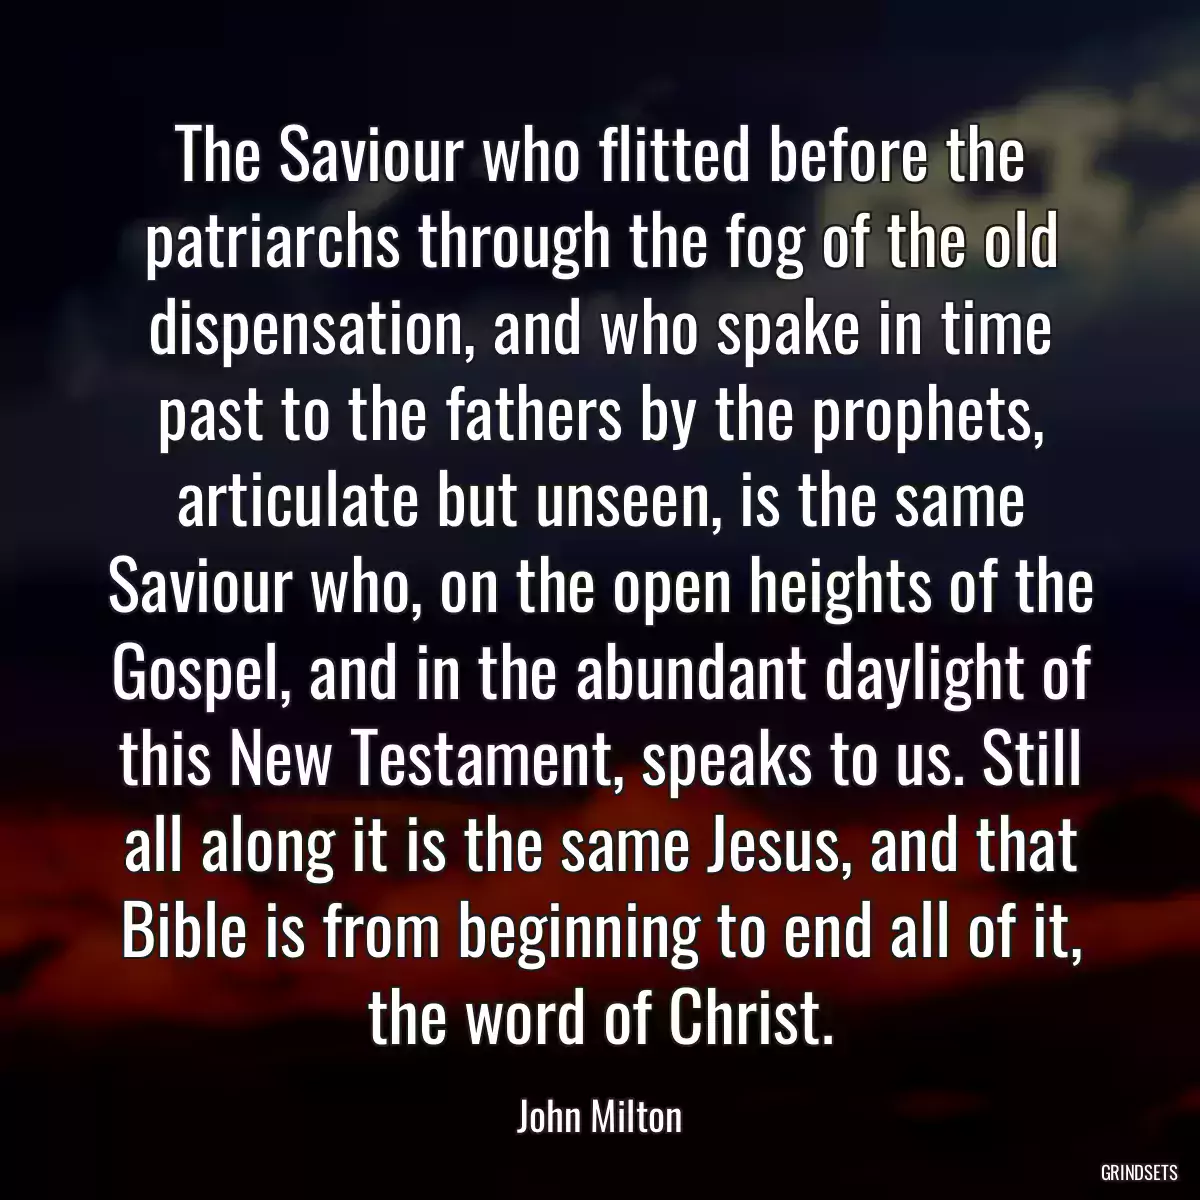 The Saviour who flitted before the patriarchs through the fog of the old dispensation, and who spake in time past to the fathers by the prophets, articulate but unseen, is the same Saviour who, on the open heights of the Gospel, and in the abundant daylight of this New Testament, speaks to us. Still all along it is the same Jesus, and that Bible is from beginning to end all of it, the word of Christ.